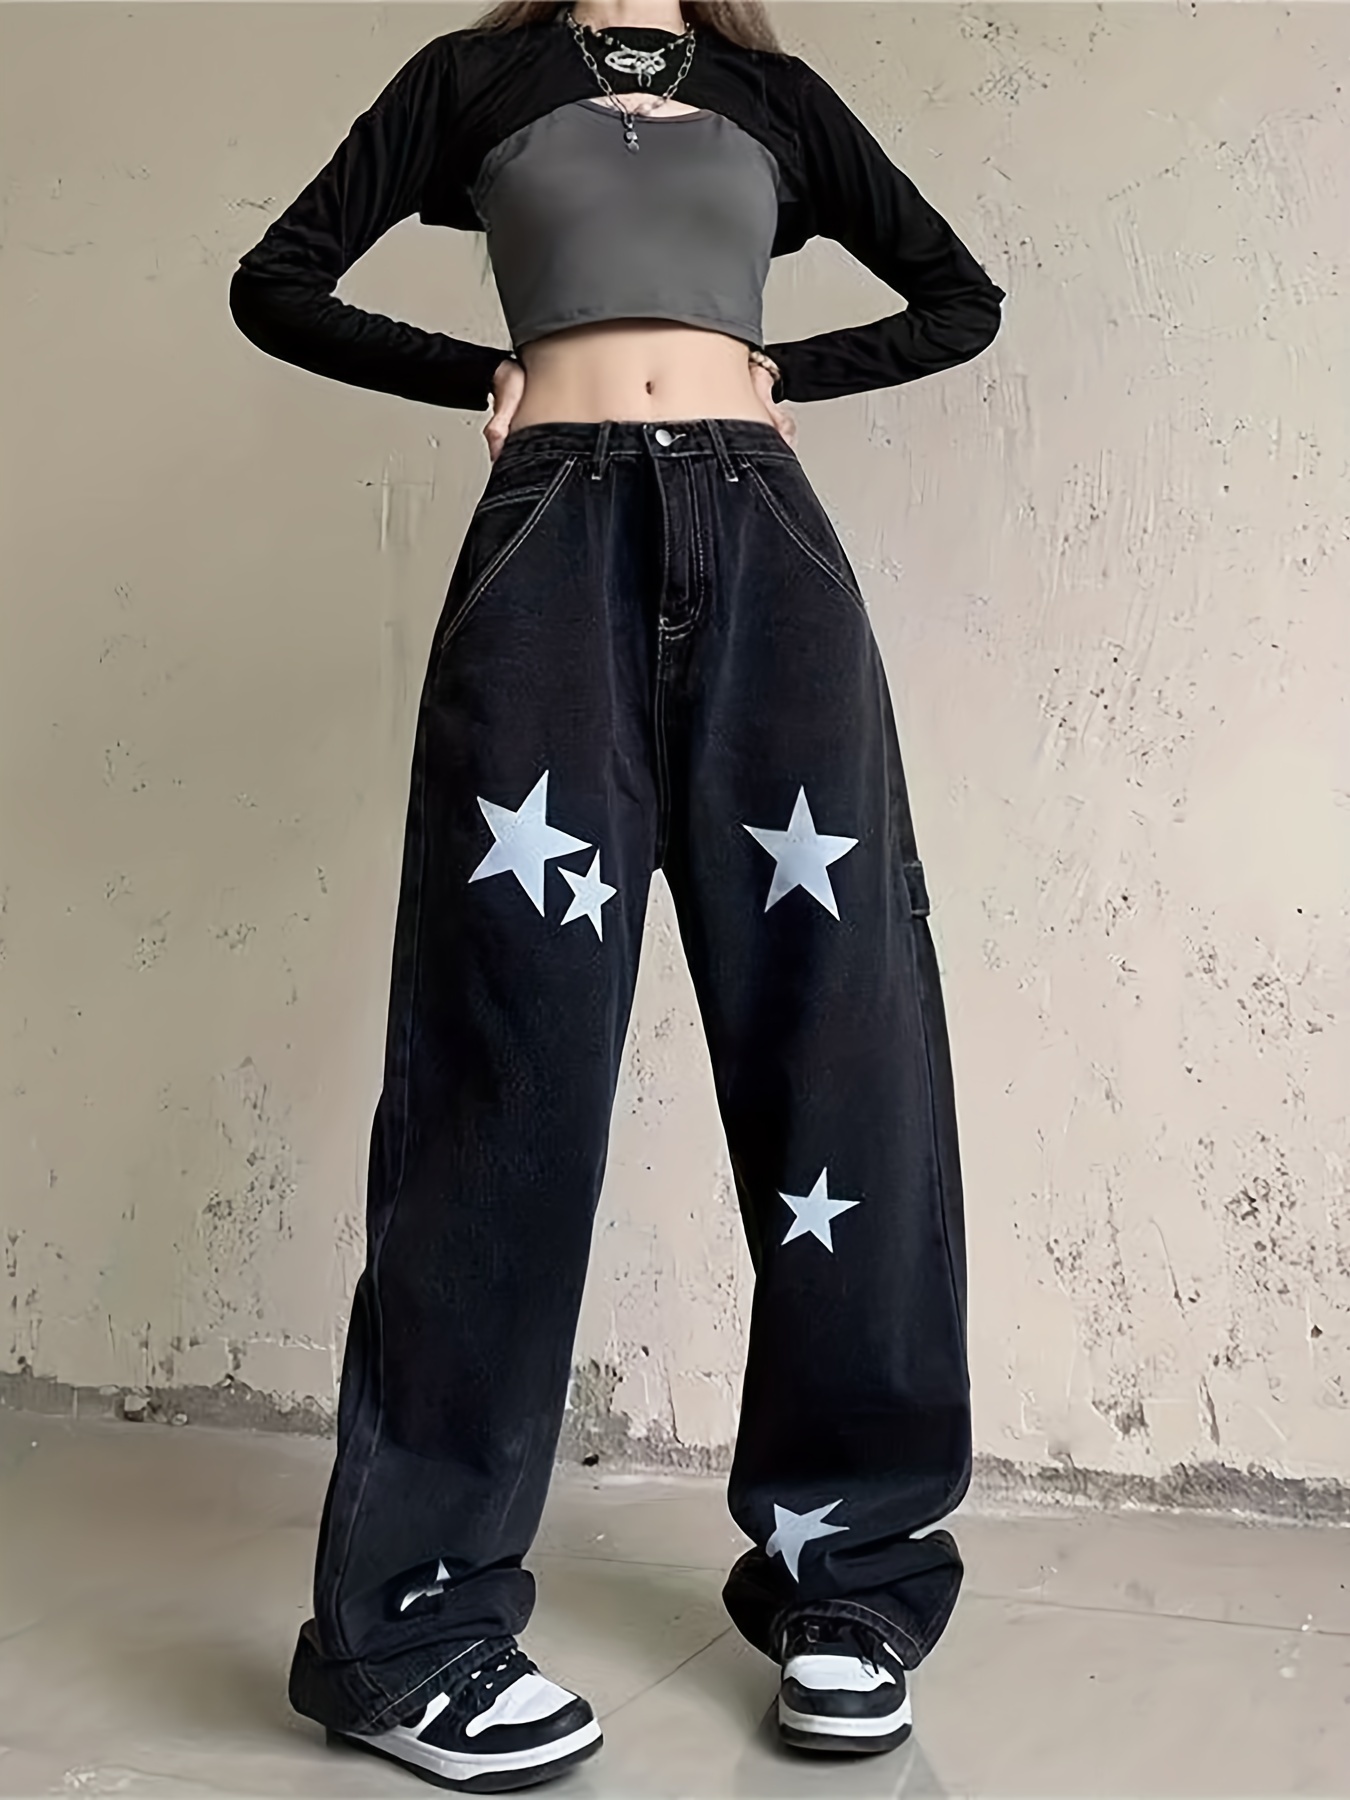 Jeans Y2K Aesthetic Outfits Skull Vintage Patch Designs Y2k Jeans